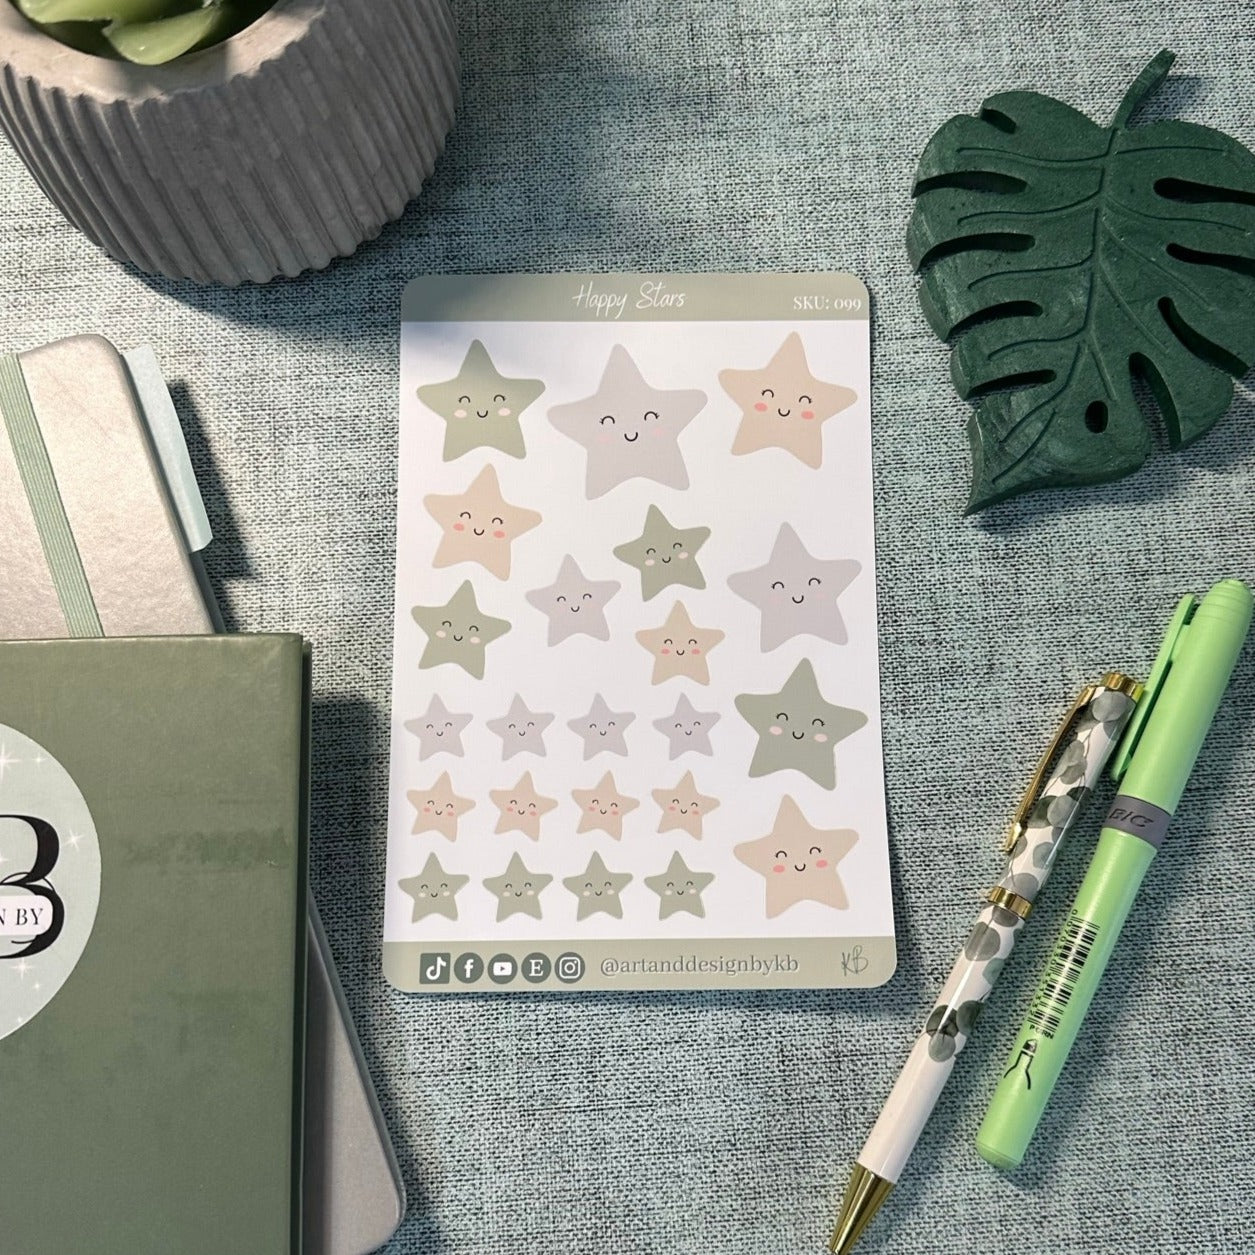 Happy Stars Sticker Sheet | Planner Stickers with a star theme